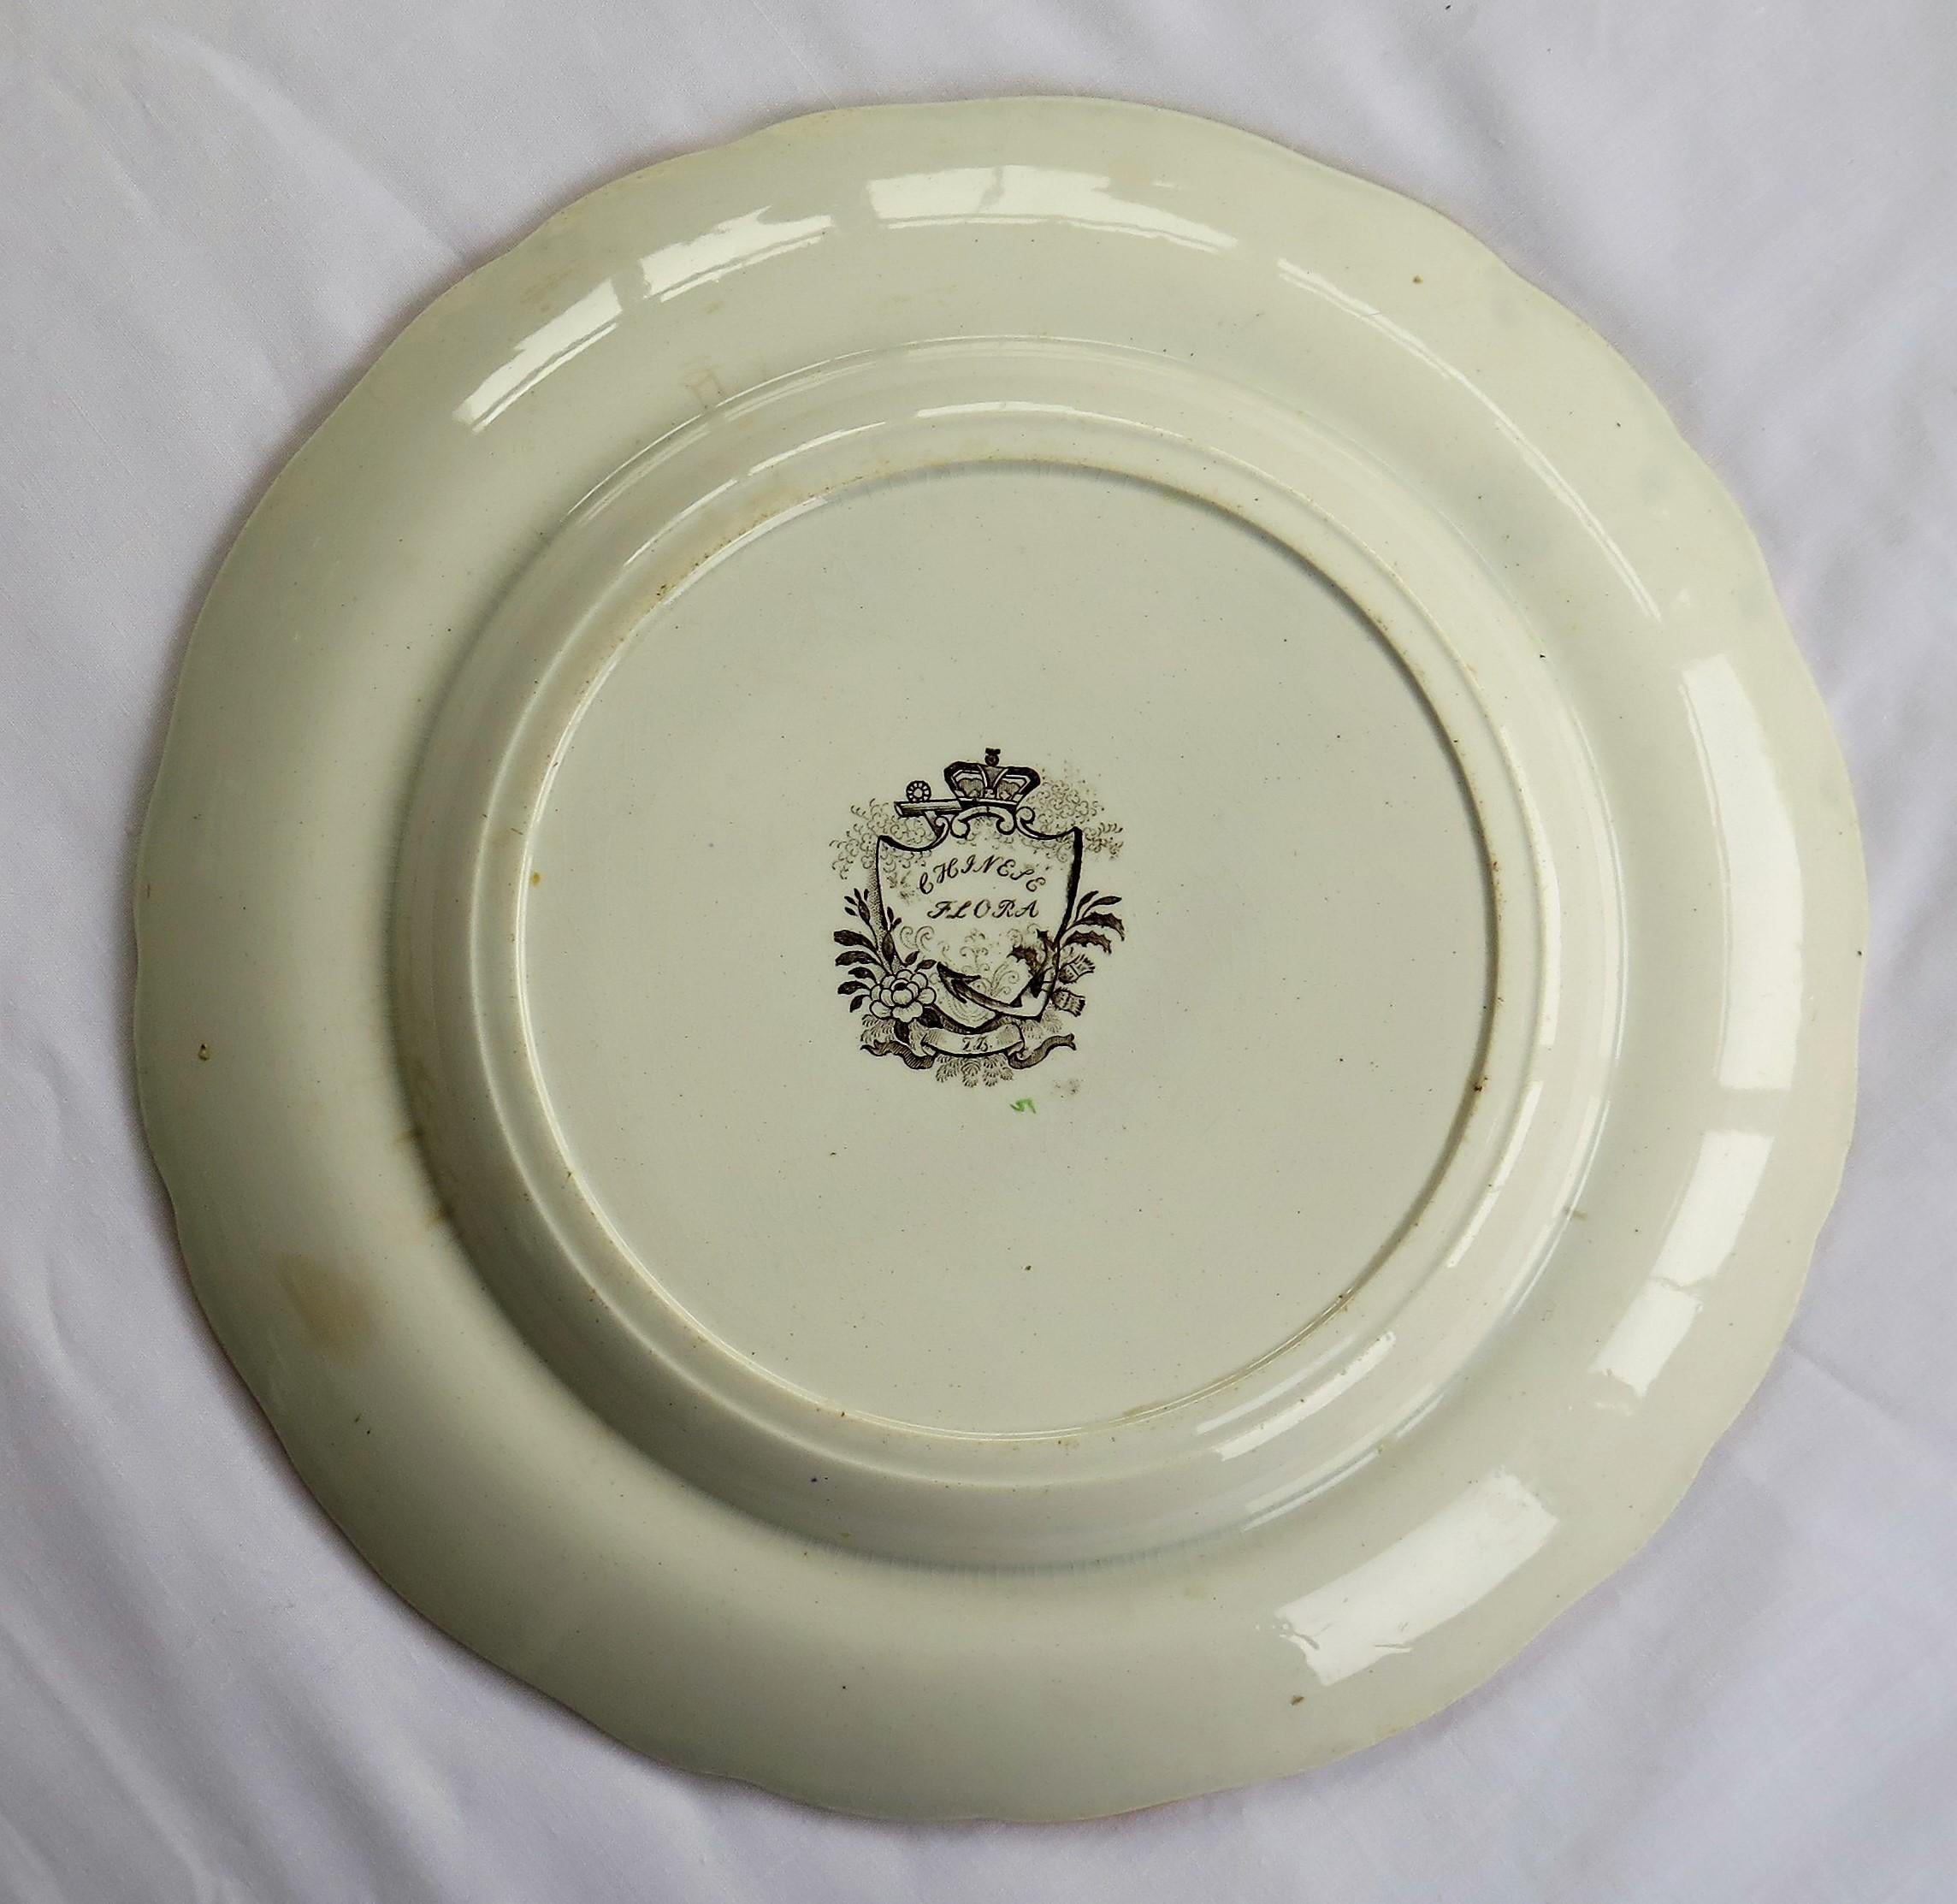 SIX Large Pottery Dinner Plates by Zachariah Boyle Chinese Flora Ptn, circa 1825 1